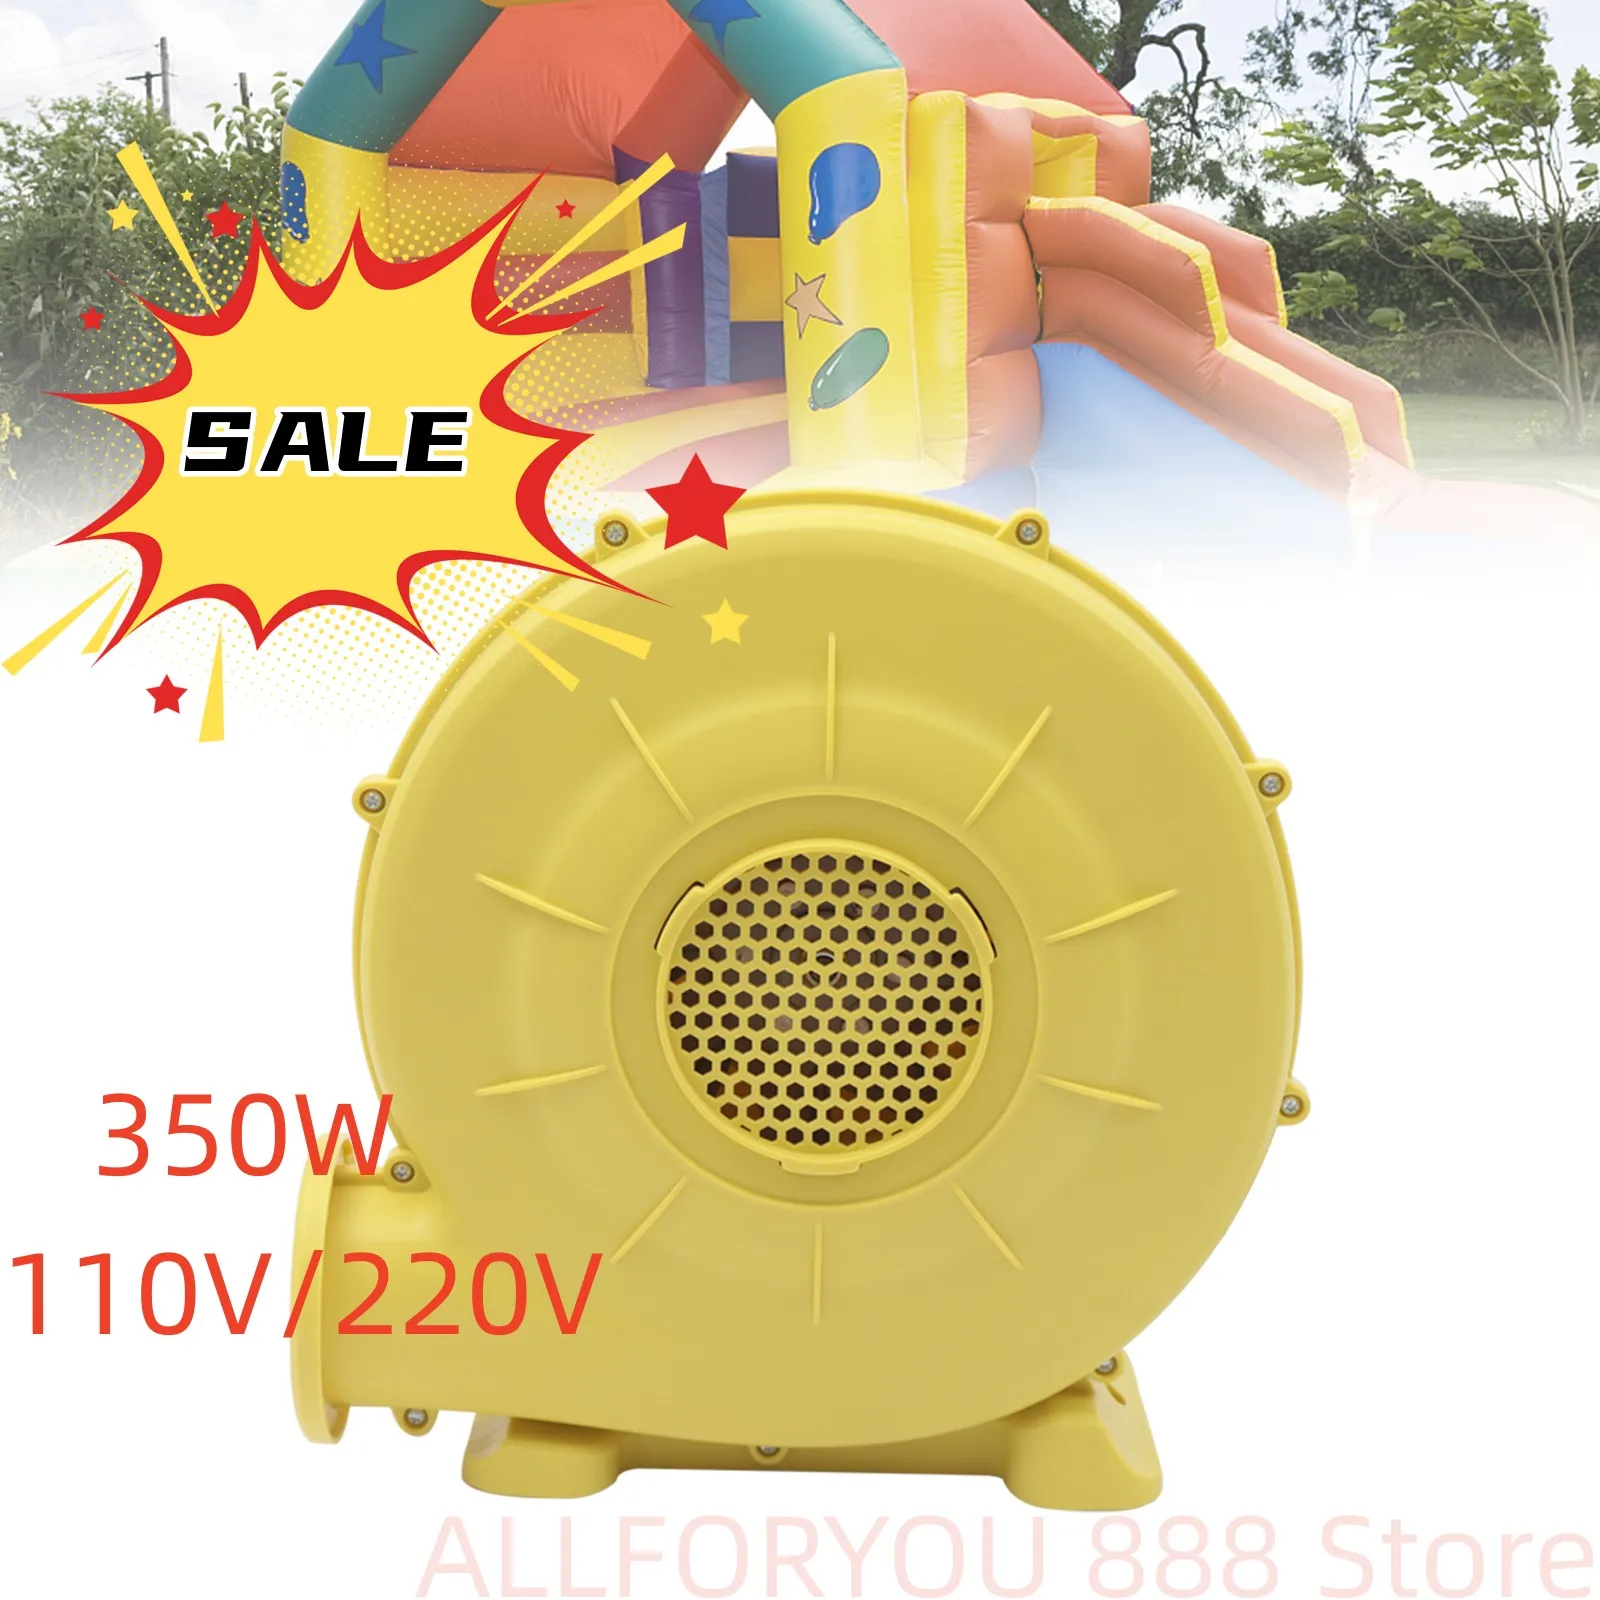 350W Air Blower Suitable For Outdoor Bounce Houses, Water slides, Obstacle Courses 110V/220V 3 pack hyper bouncy ball all ages extreme bounce and fun perfect for active play and outdoor games rainbow moon balls for kids